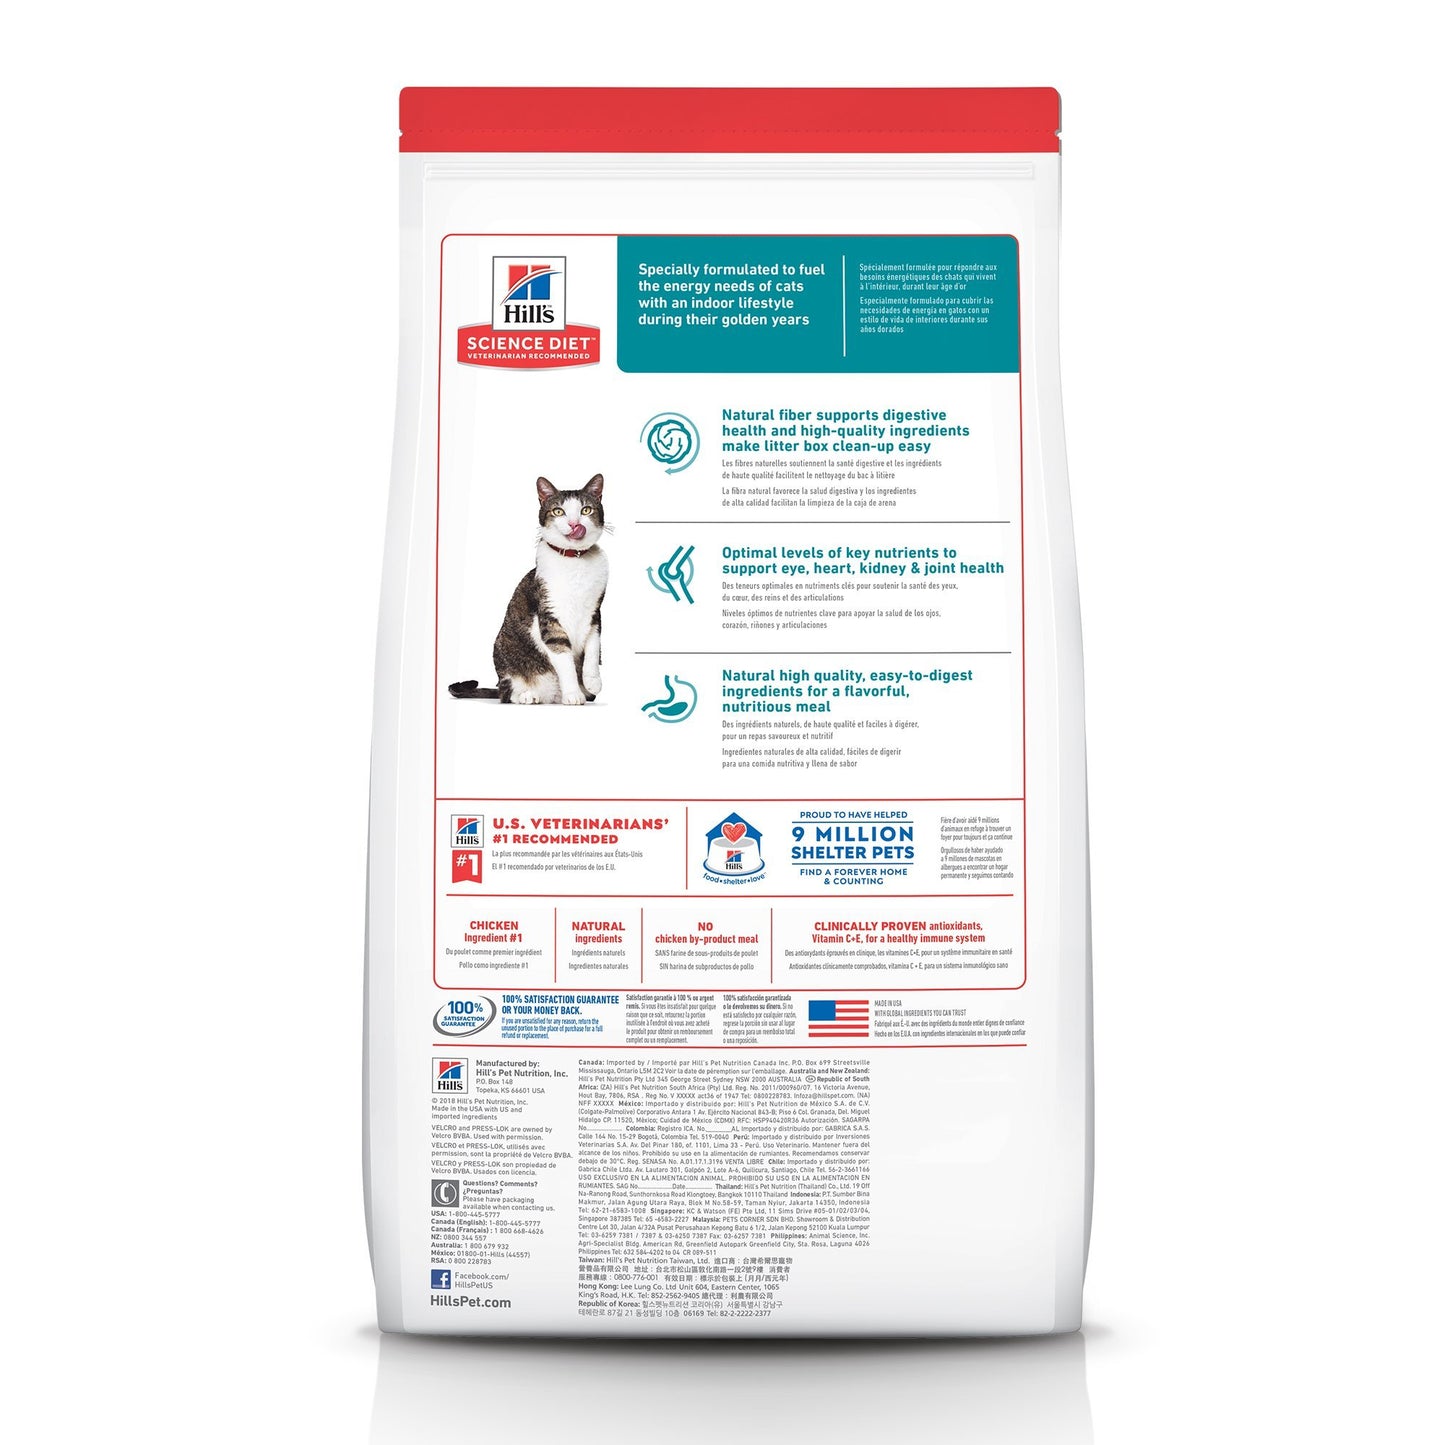 Hill's Science Diet Adult 11+ Chicken Recipe Dry Cat Food, 3.17 Kg Bag  Cat Food  | PetMax Canada